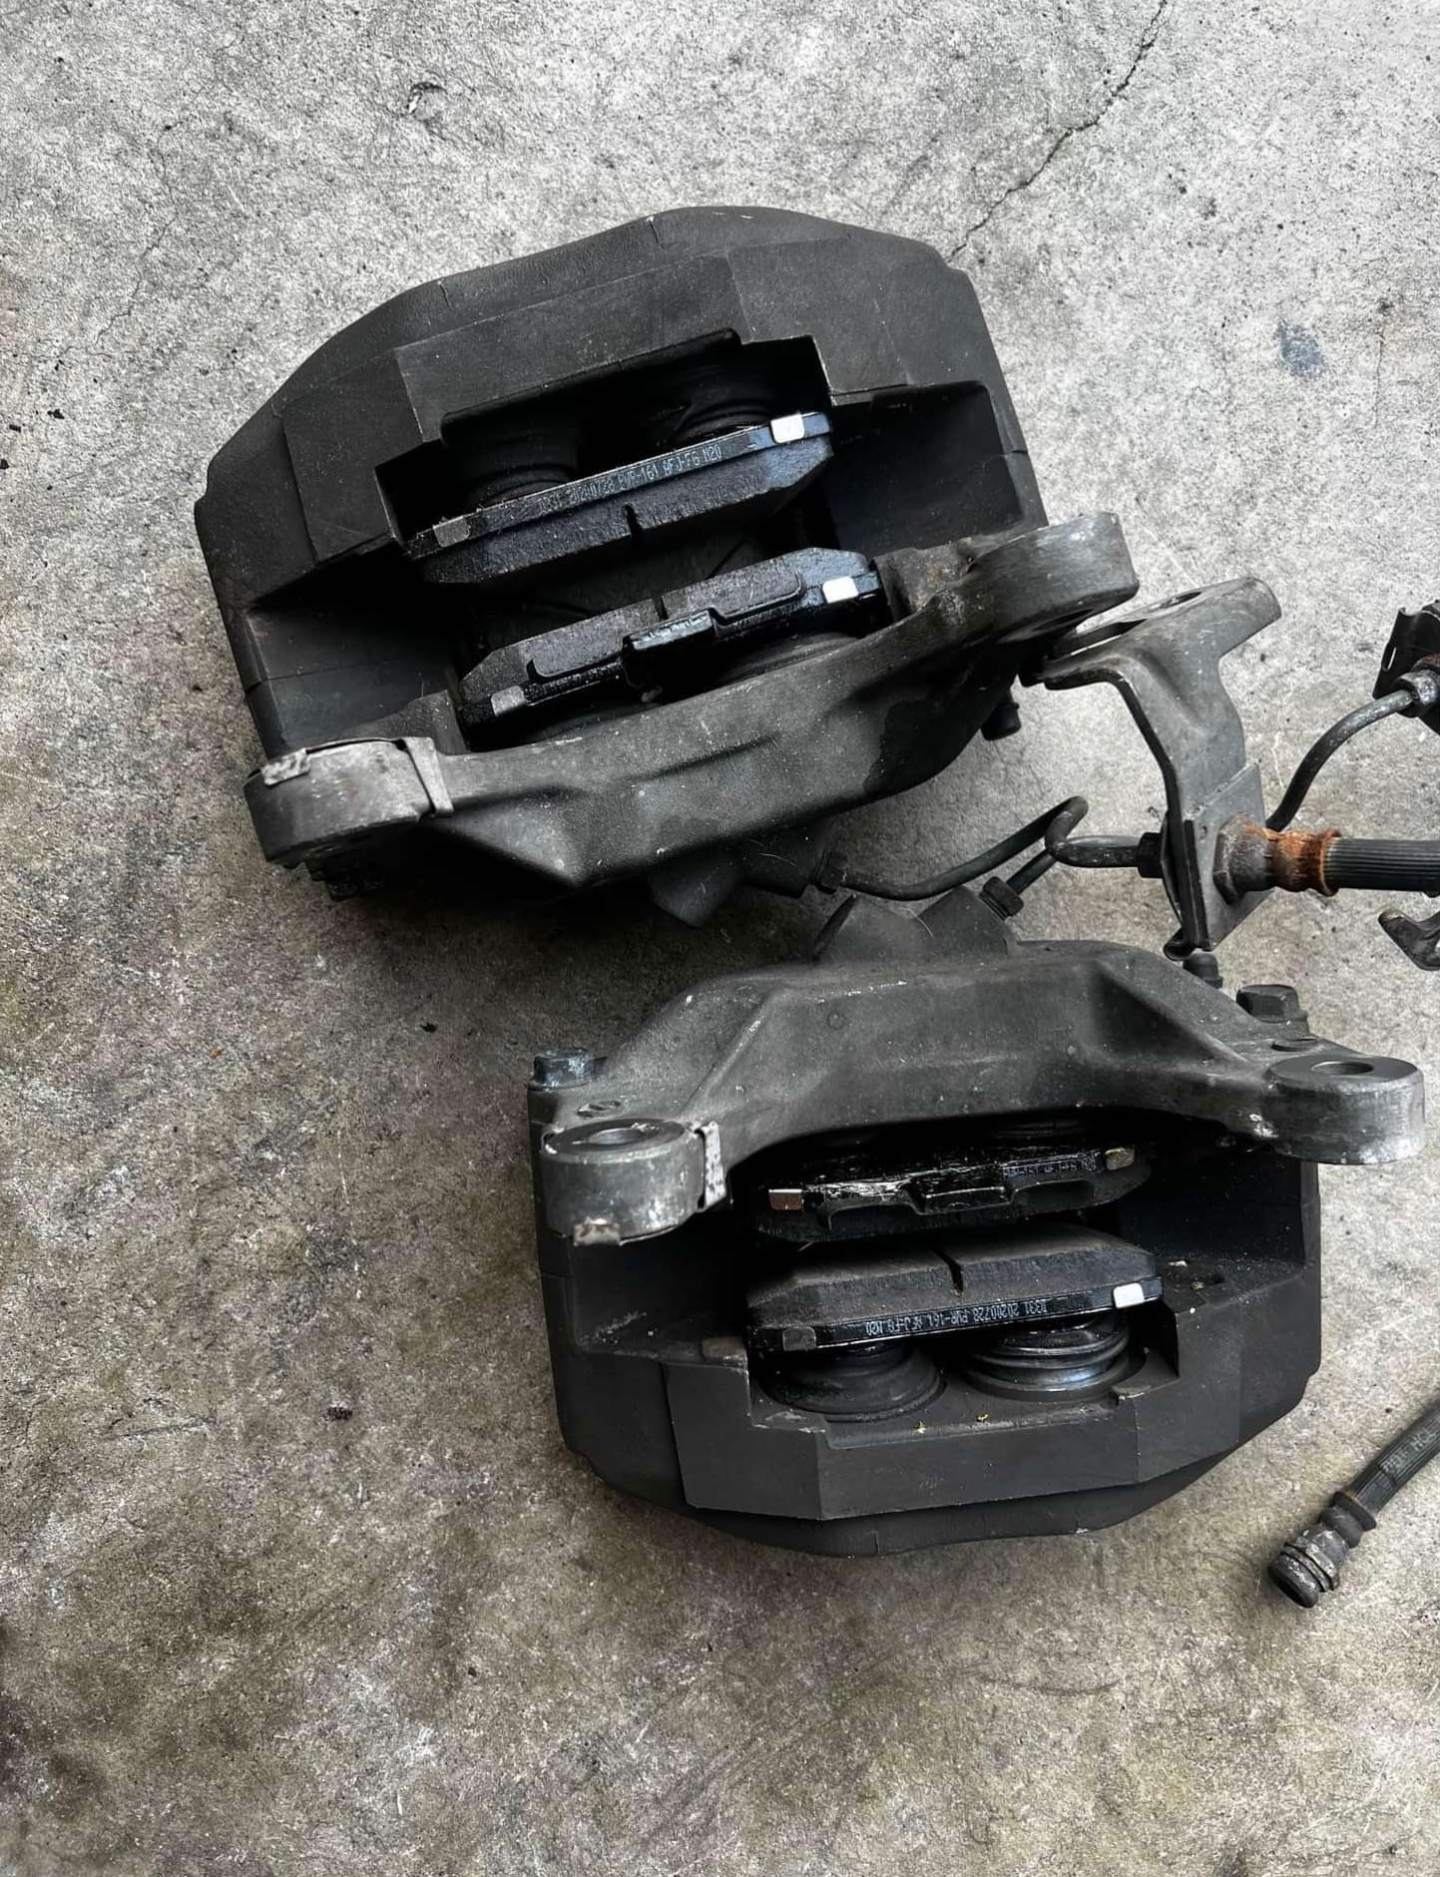 Brakes - RX7 FD 99 Spec/RZ/RS 17" Calipers - Used - 0  All Models - Sugarland, TX 77498, United States